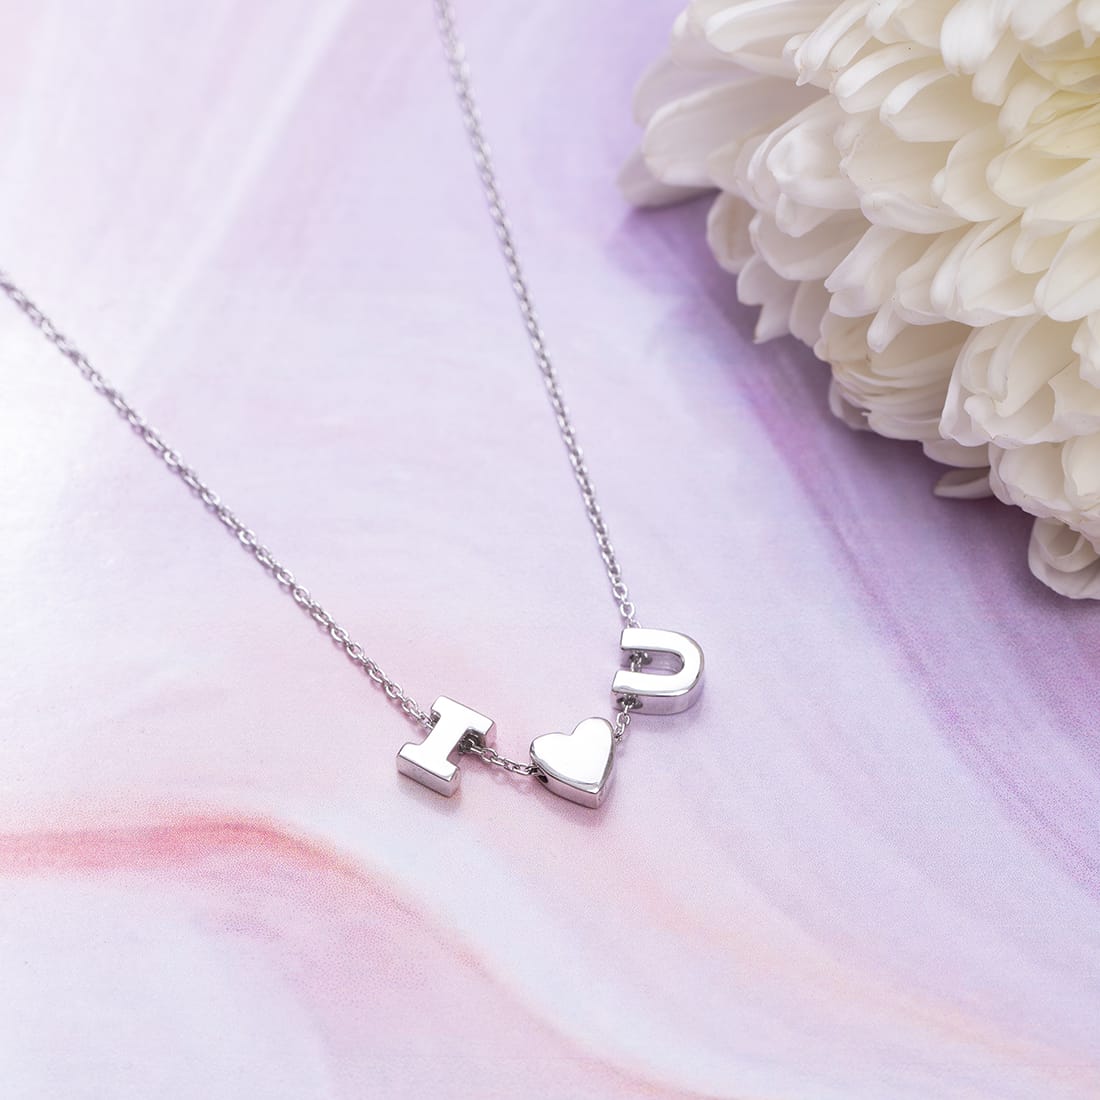 I Love You 925 Sterling Silver Necklace